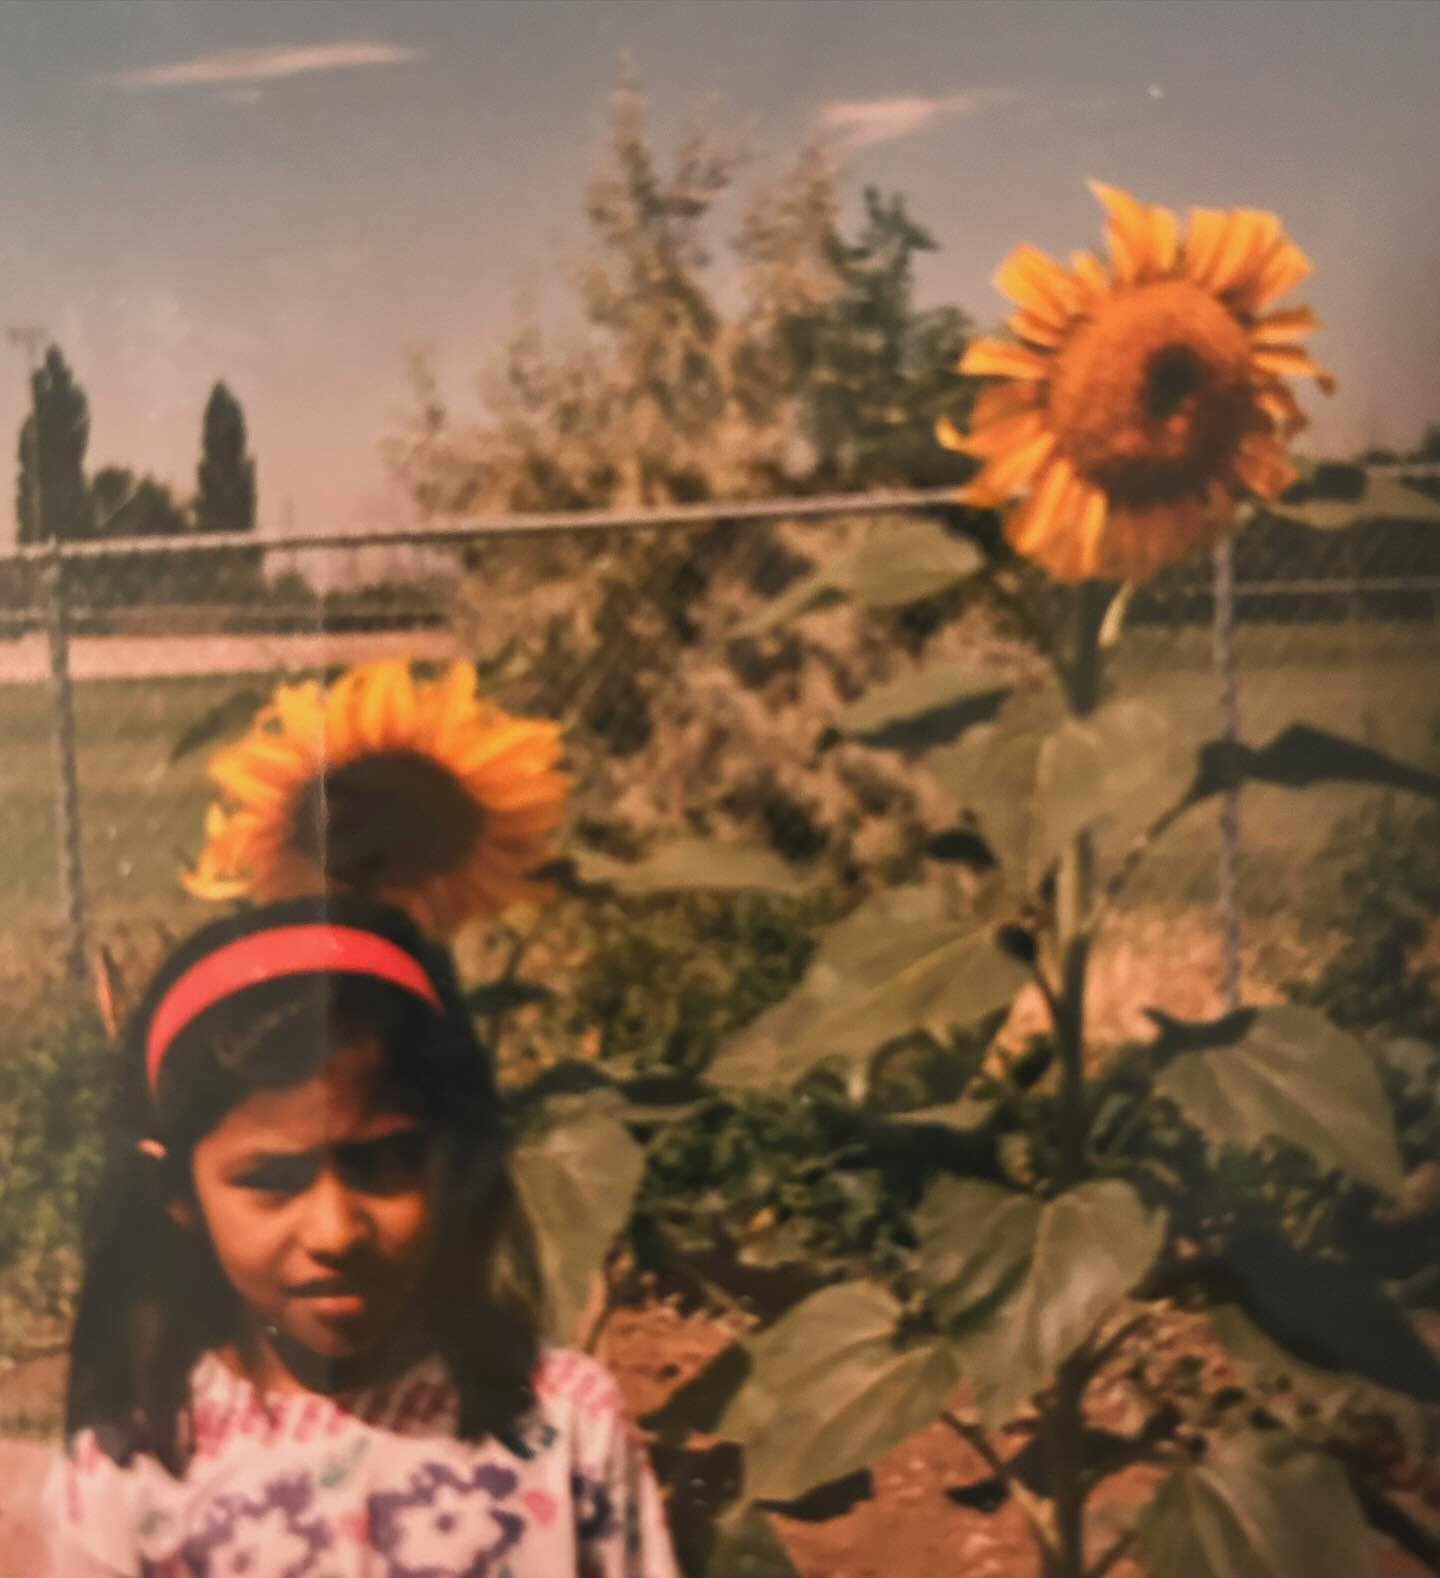 Throwback to my childhood days in Utah, standing next to my favorite flower: the sunflower 🌻. I remember gifting seeds to my mom, and watching her nurture them into towering blooms in our garden. Those sunny faces always brought so much joy to our d